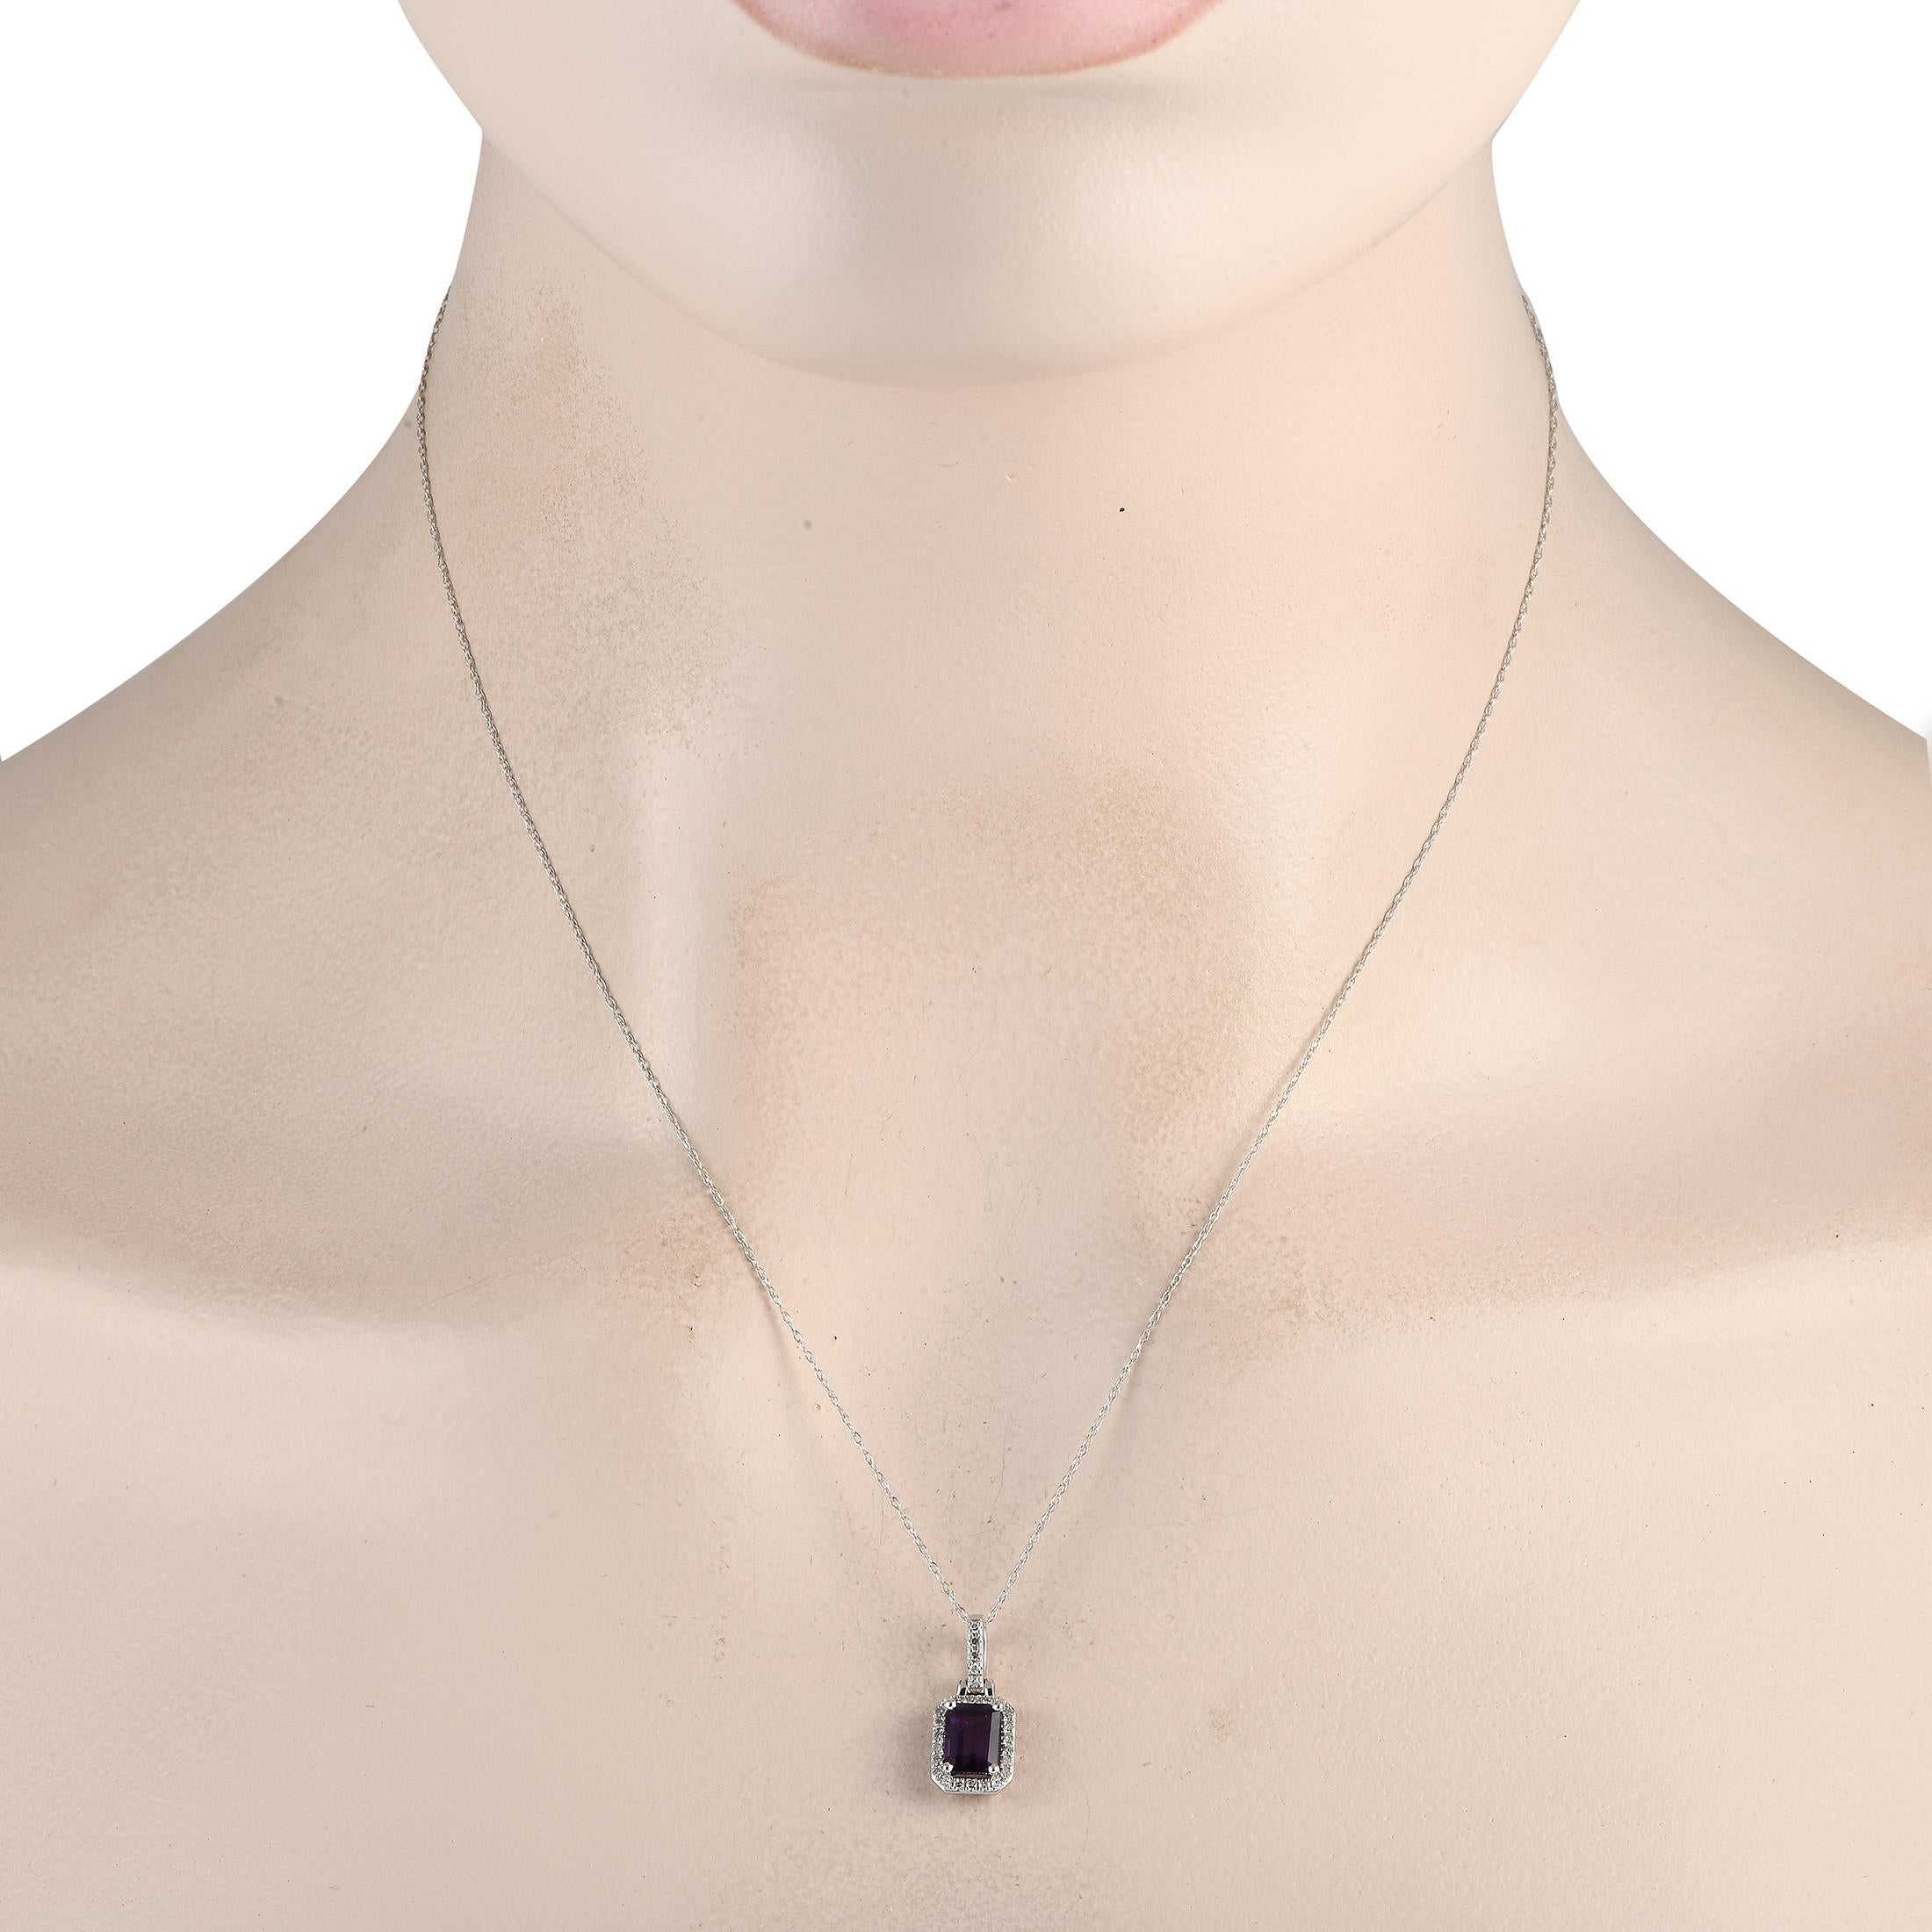 Bring a hint of drama to your wardrobe by accessorizing using this diamond and amethyst necklace. It features a 14K white gold chain with a diamond-studded bail. The pendant has an emerald-cut amethyst secured by four prongs and surrounded by a